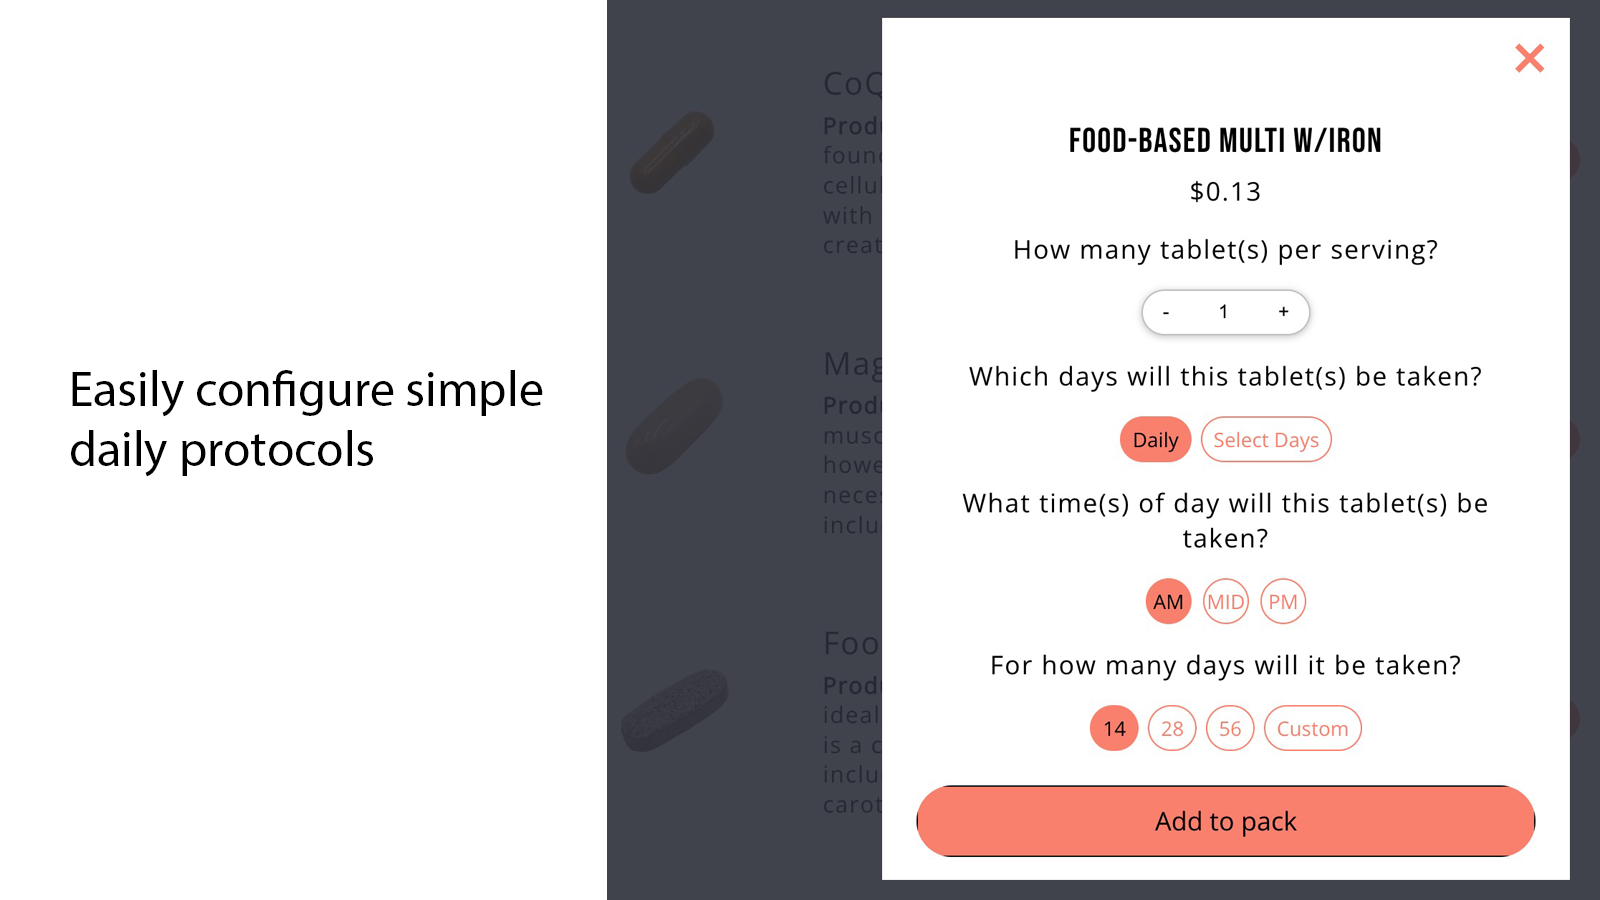 Basic: Your consumers can create simple daily protocols